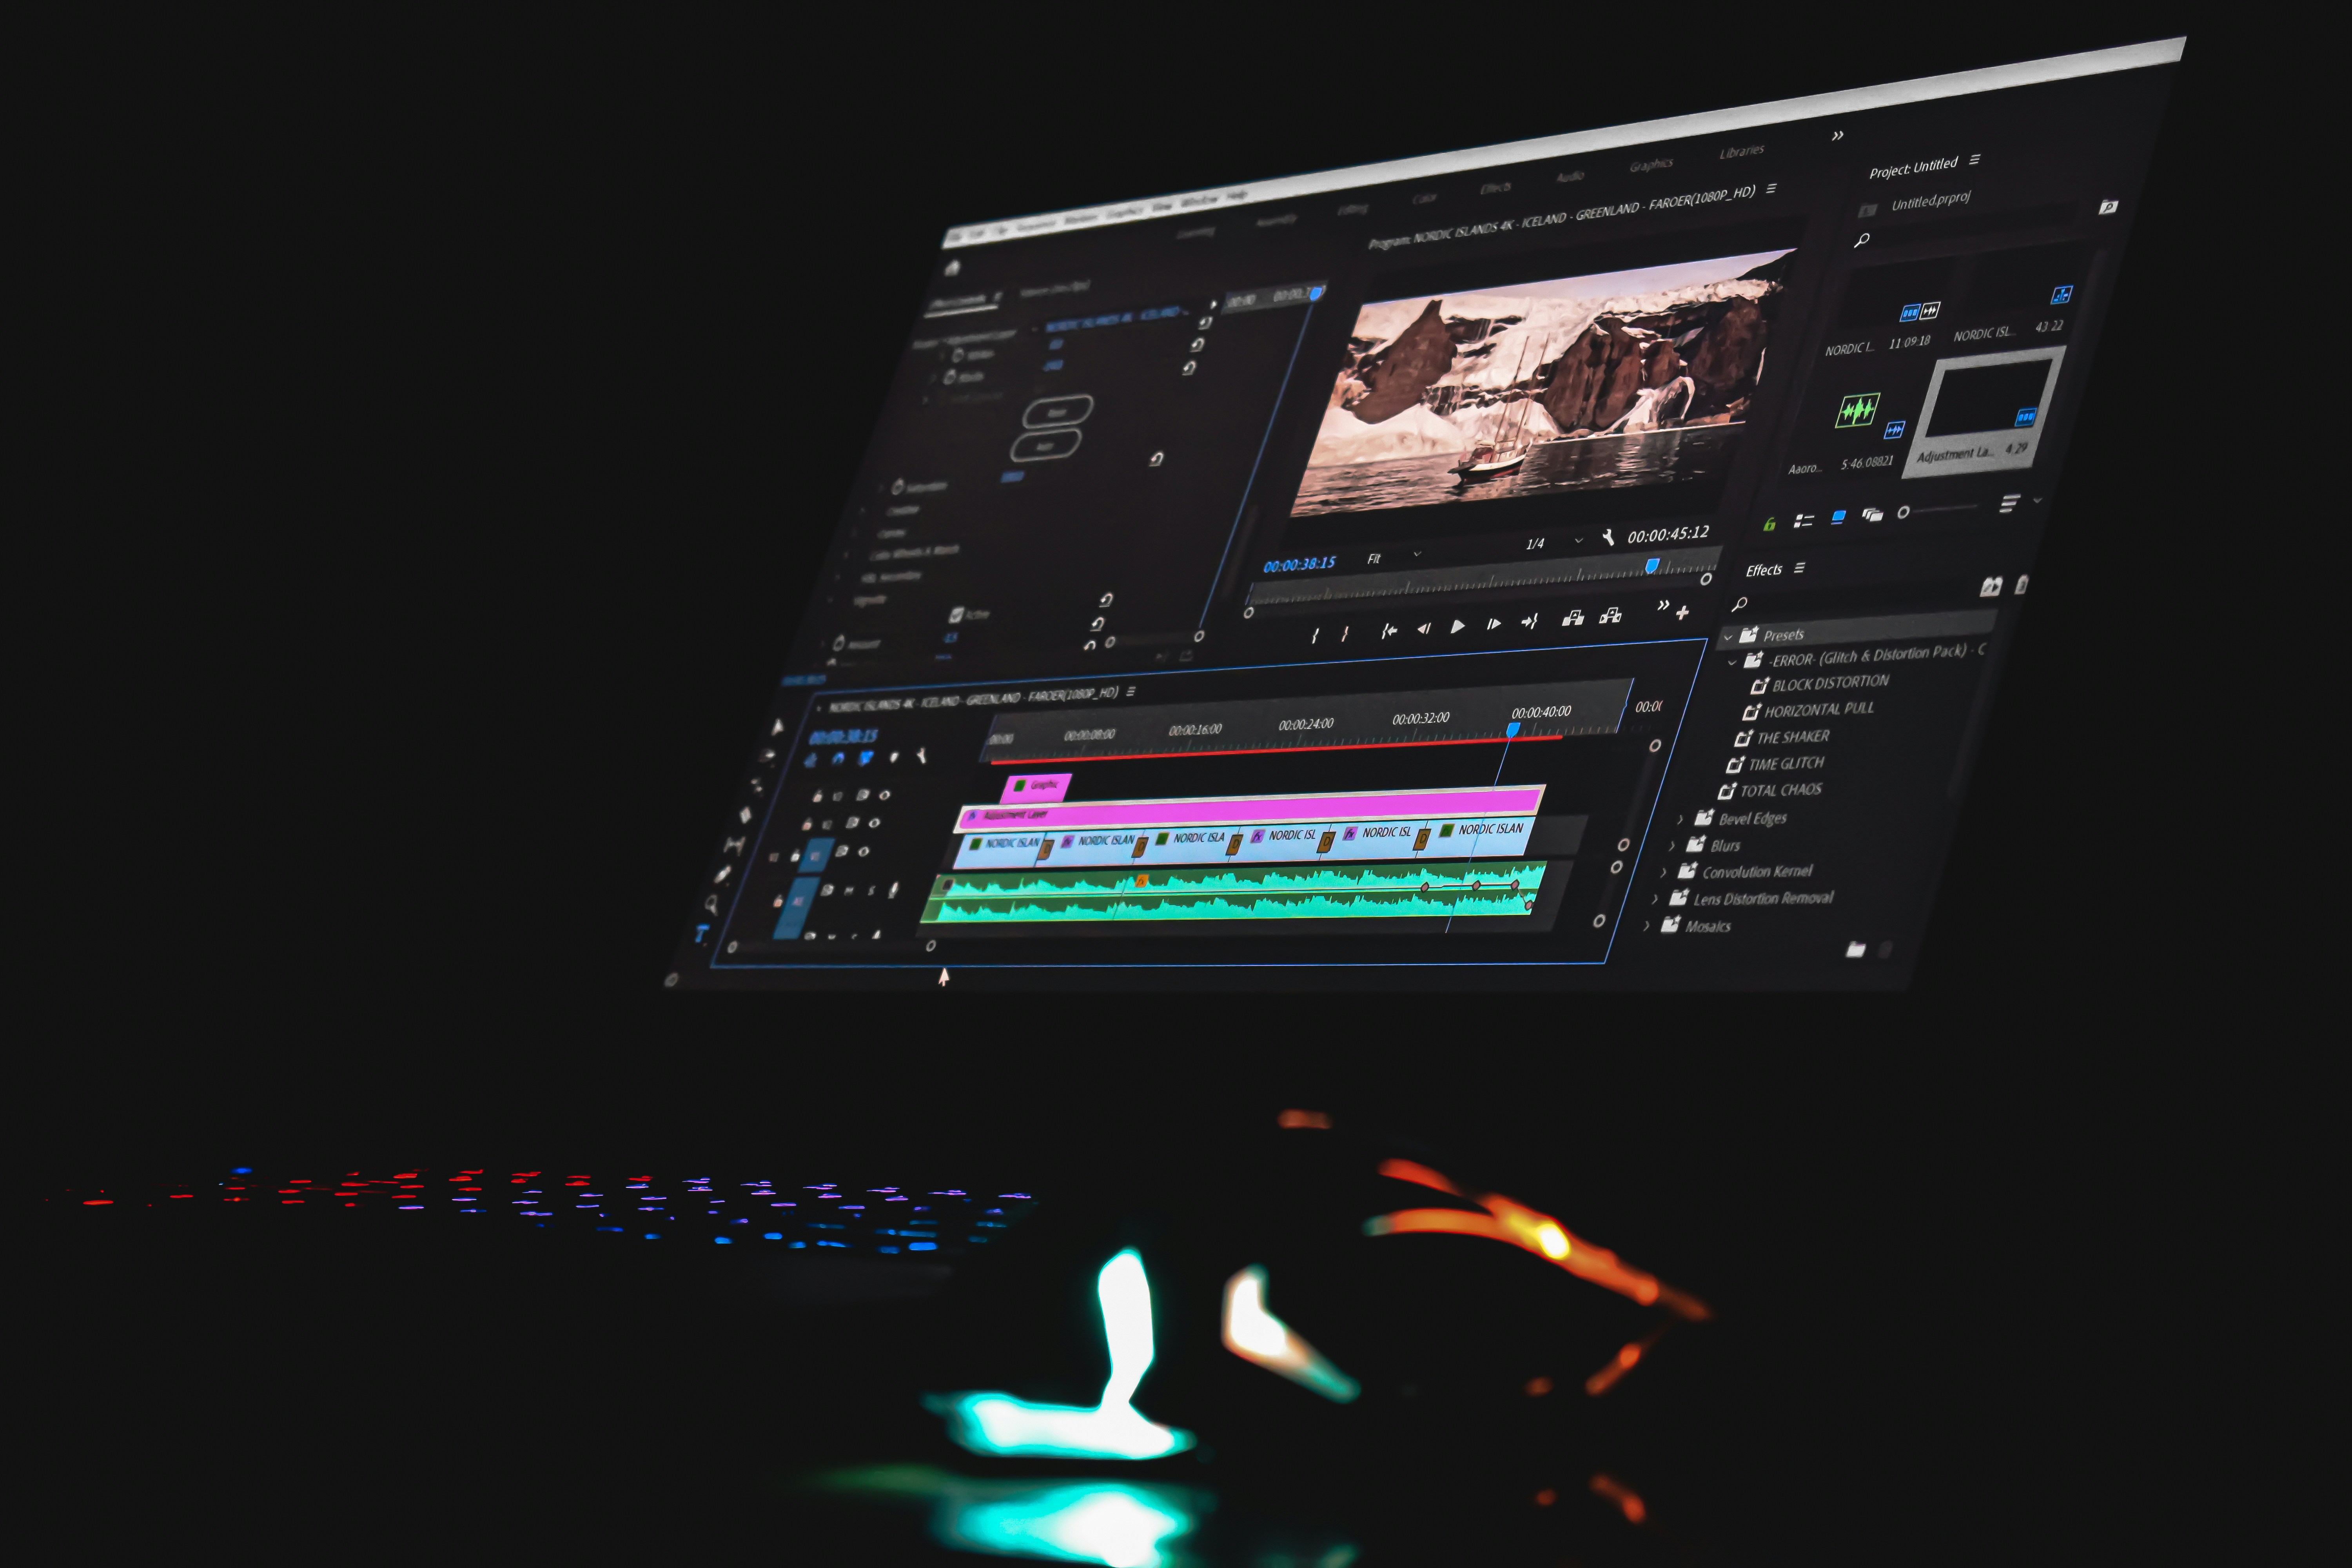 Top Features to Look for in Video Editing Software